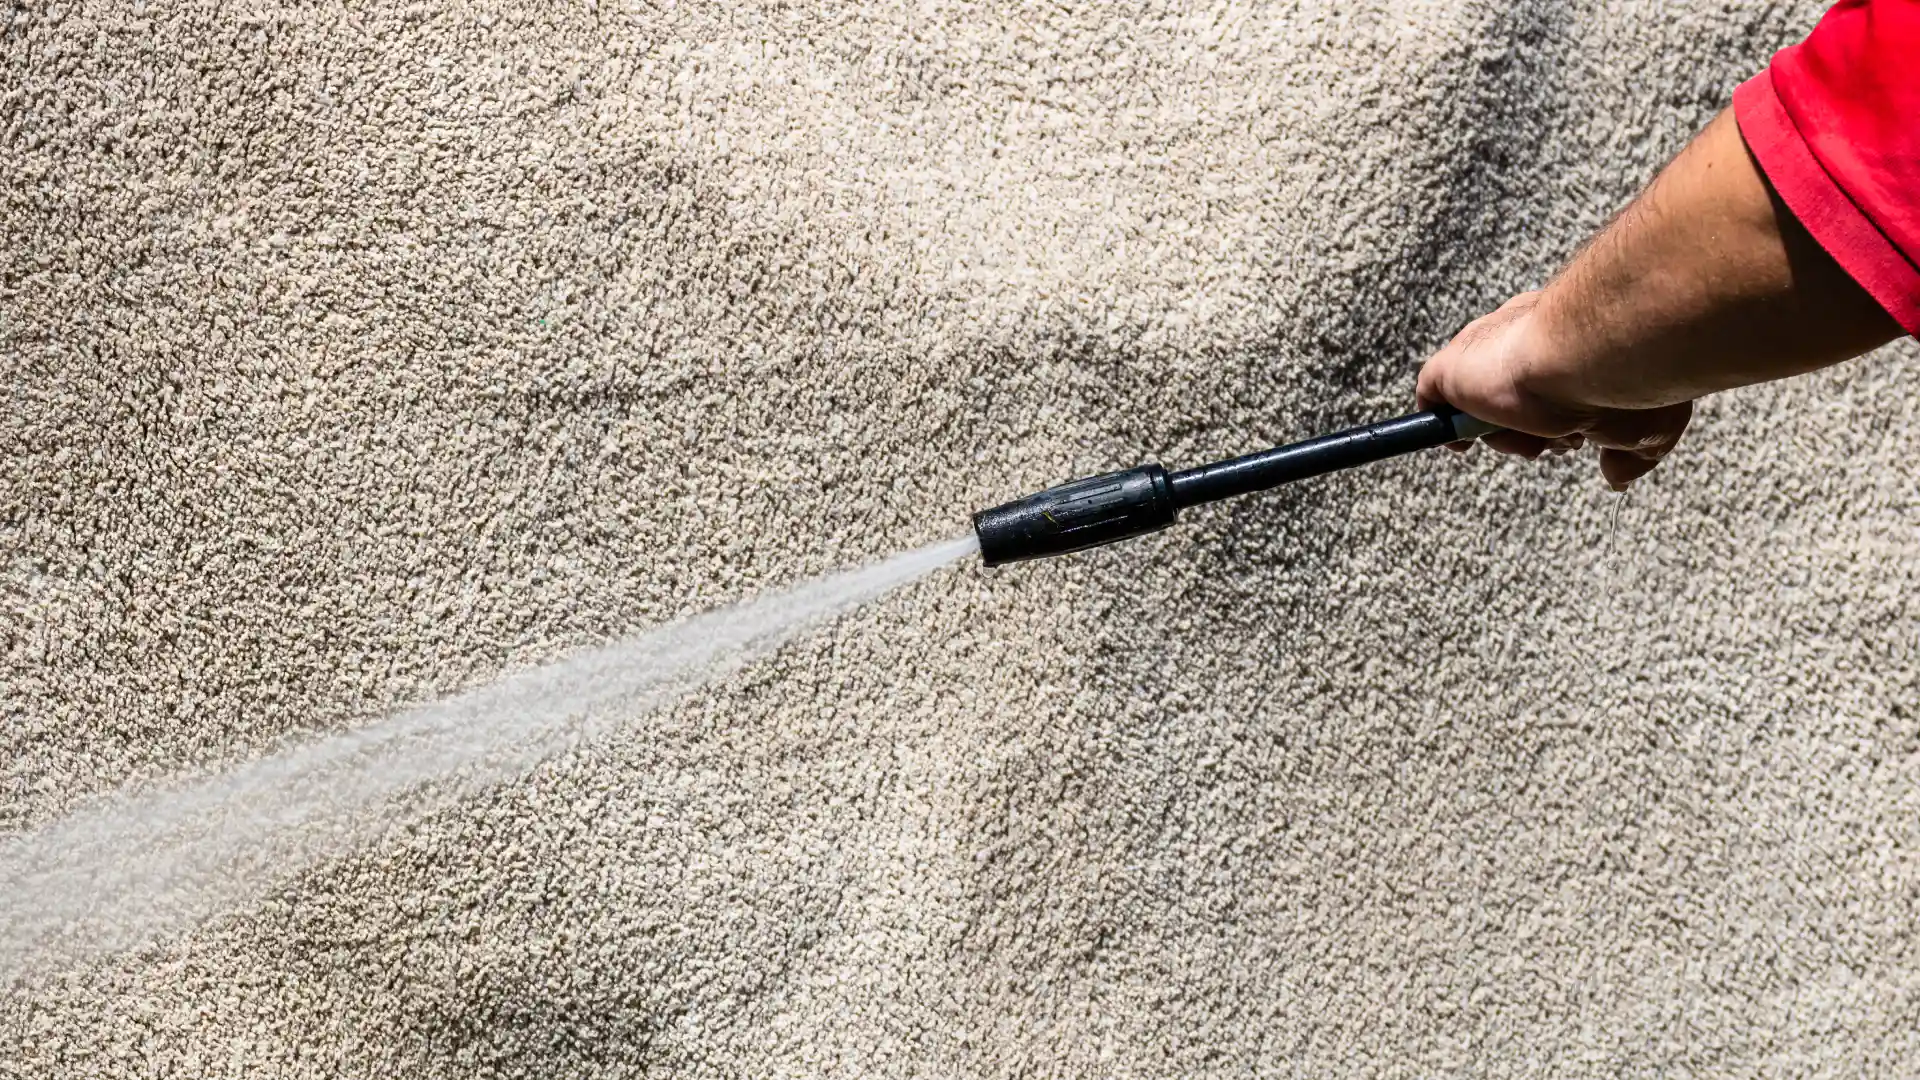 cleaning carpet with pressure washer scottsdale az